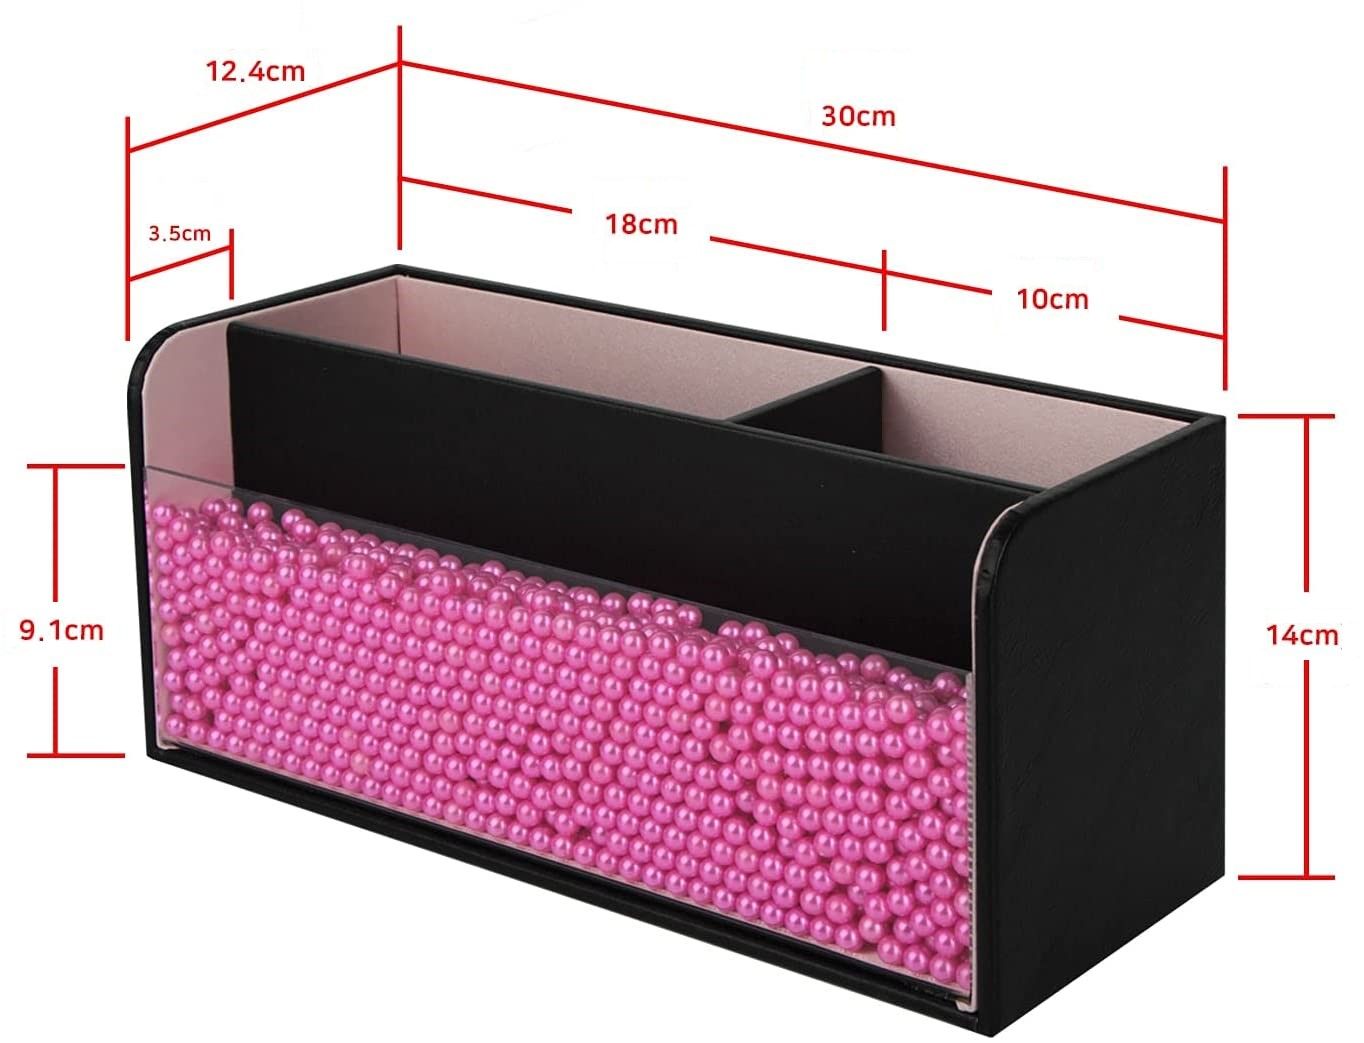 Leather Makeup Brush Organizer With Acrylic Cover And Pink Pearls (Black)